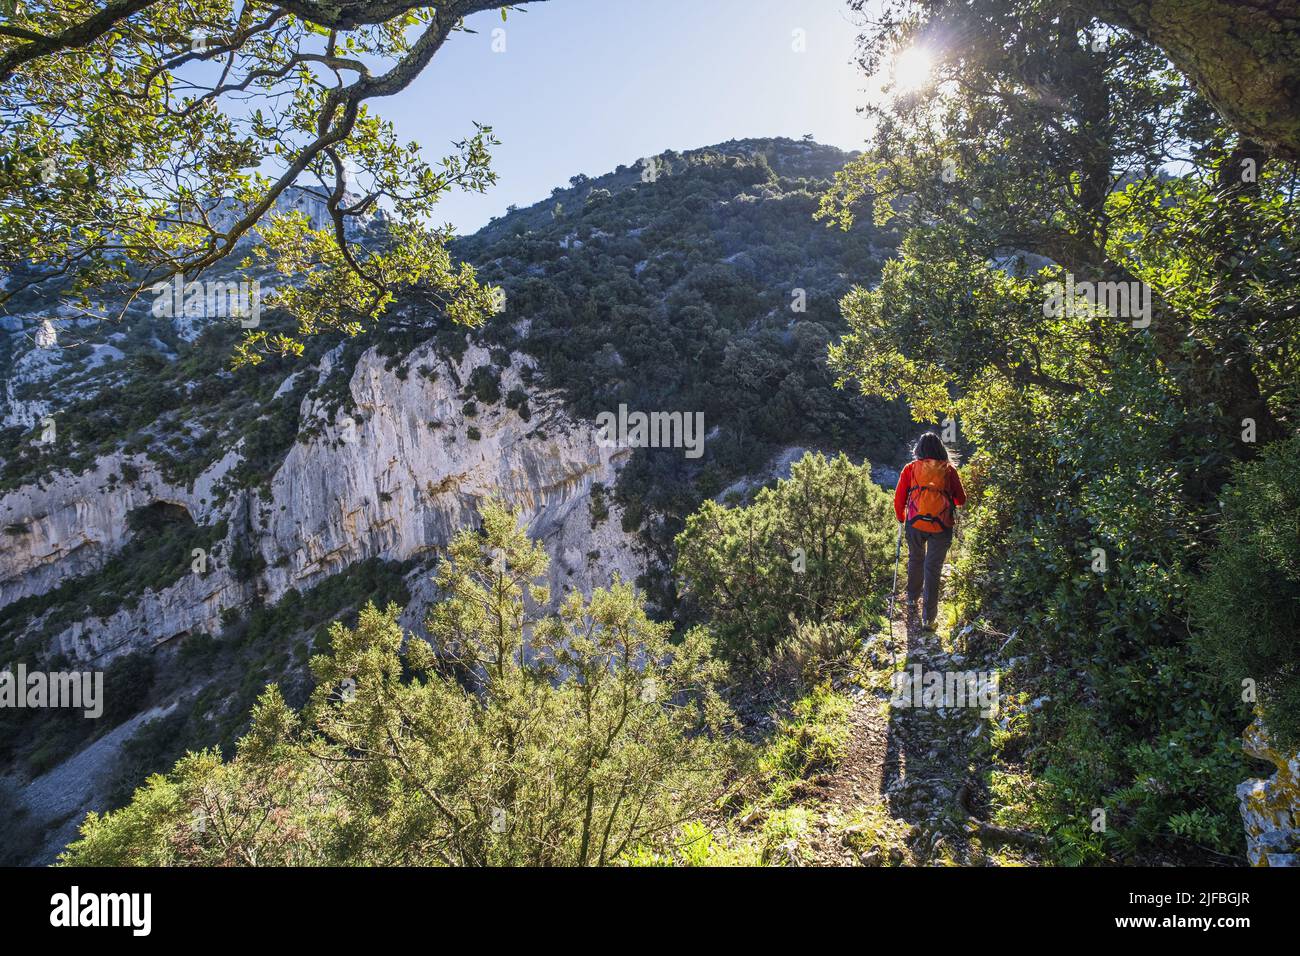 France, Vaucluse, Luberon regional nature park, hike starting from Oppede-le-Vieux, Combrès Valley Stock Photo